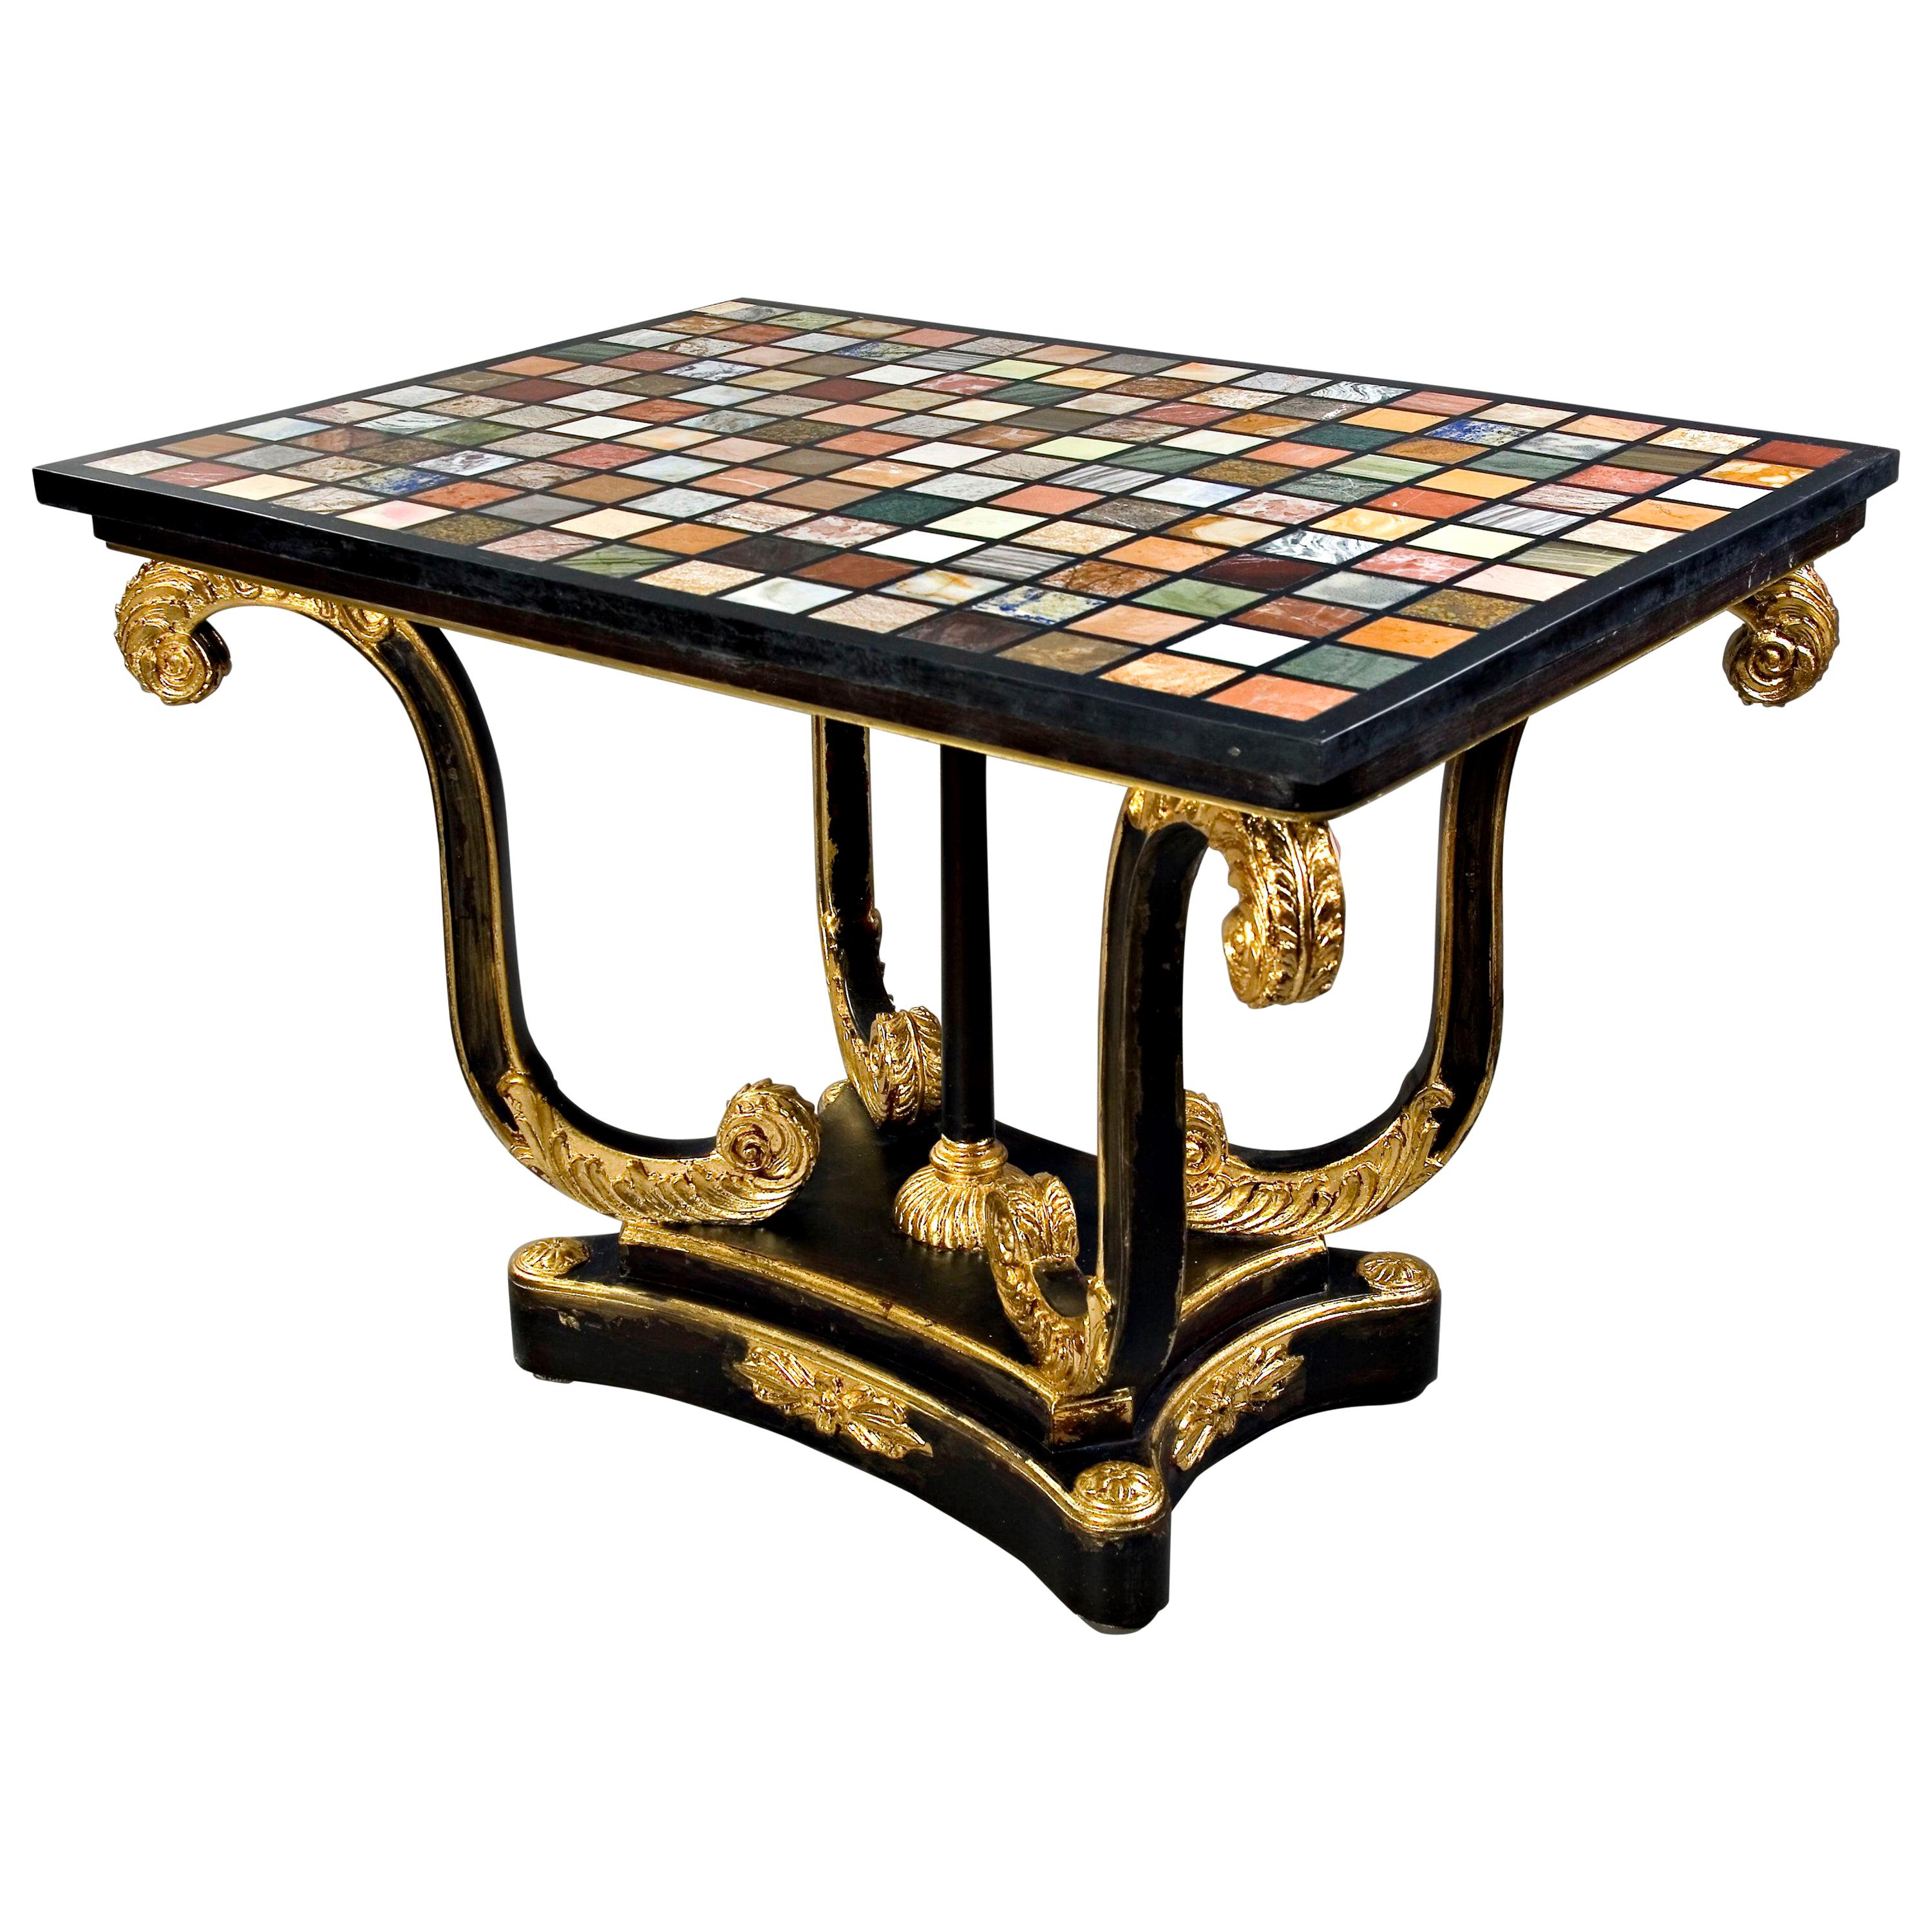 20th Century Pietra-Dura Style of Classicism Table For Sale